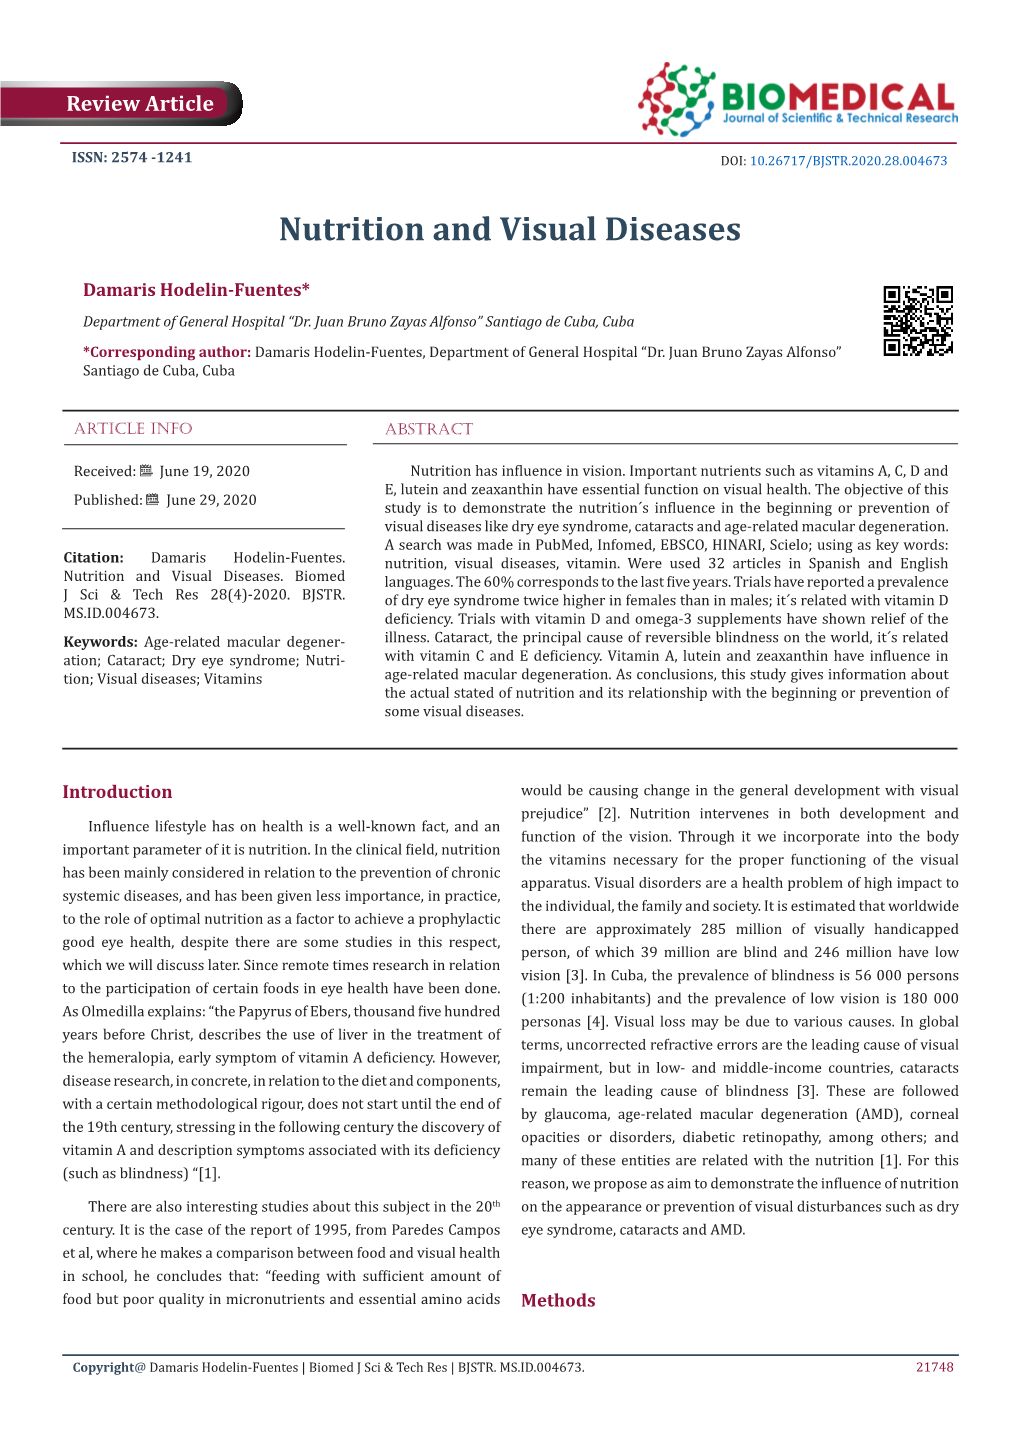 Nutrition and Visual Diseases